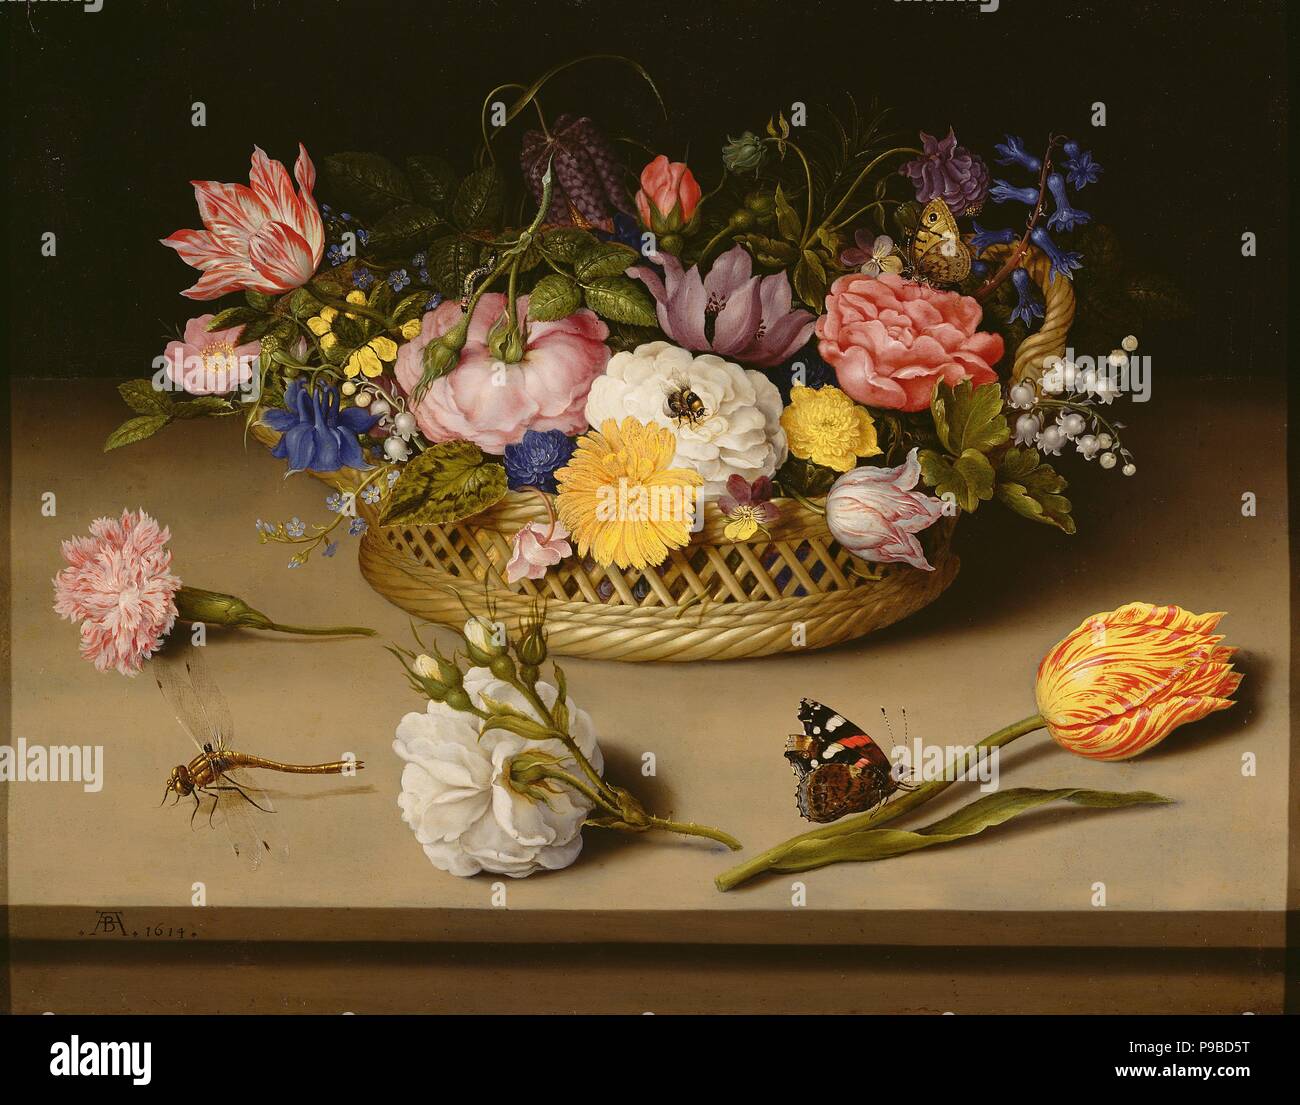 Still Life with flowers. Museum: J. Paul Getty Museum, Los Angeles. Stock Photo